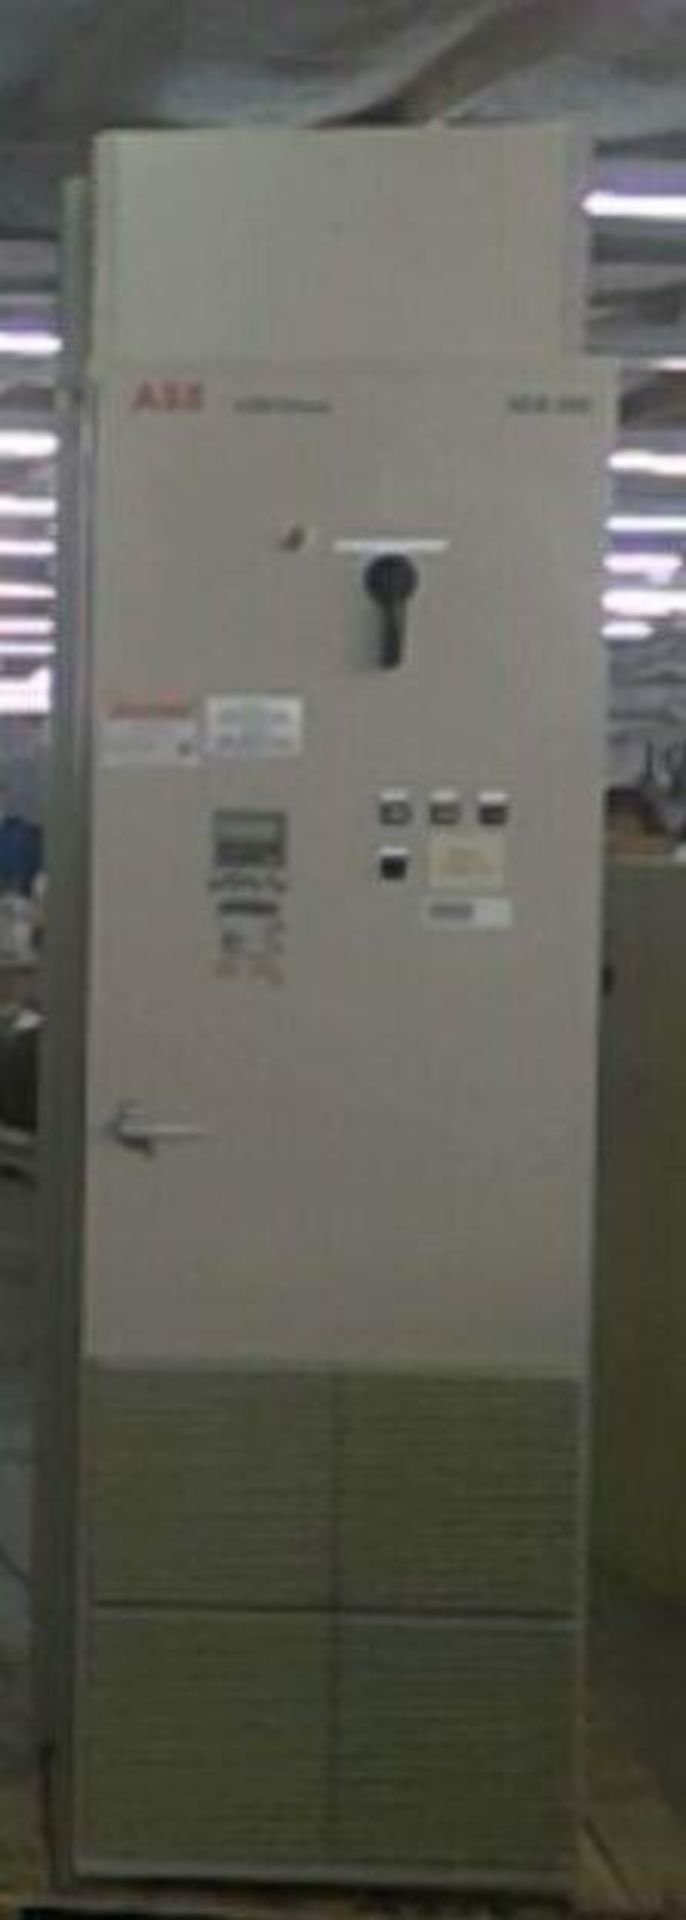 ABB ACS504050400P0 Variable Frequency Drive, 500 V, Enclosure Type 12